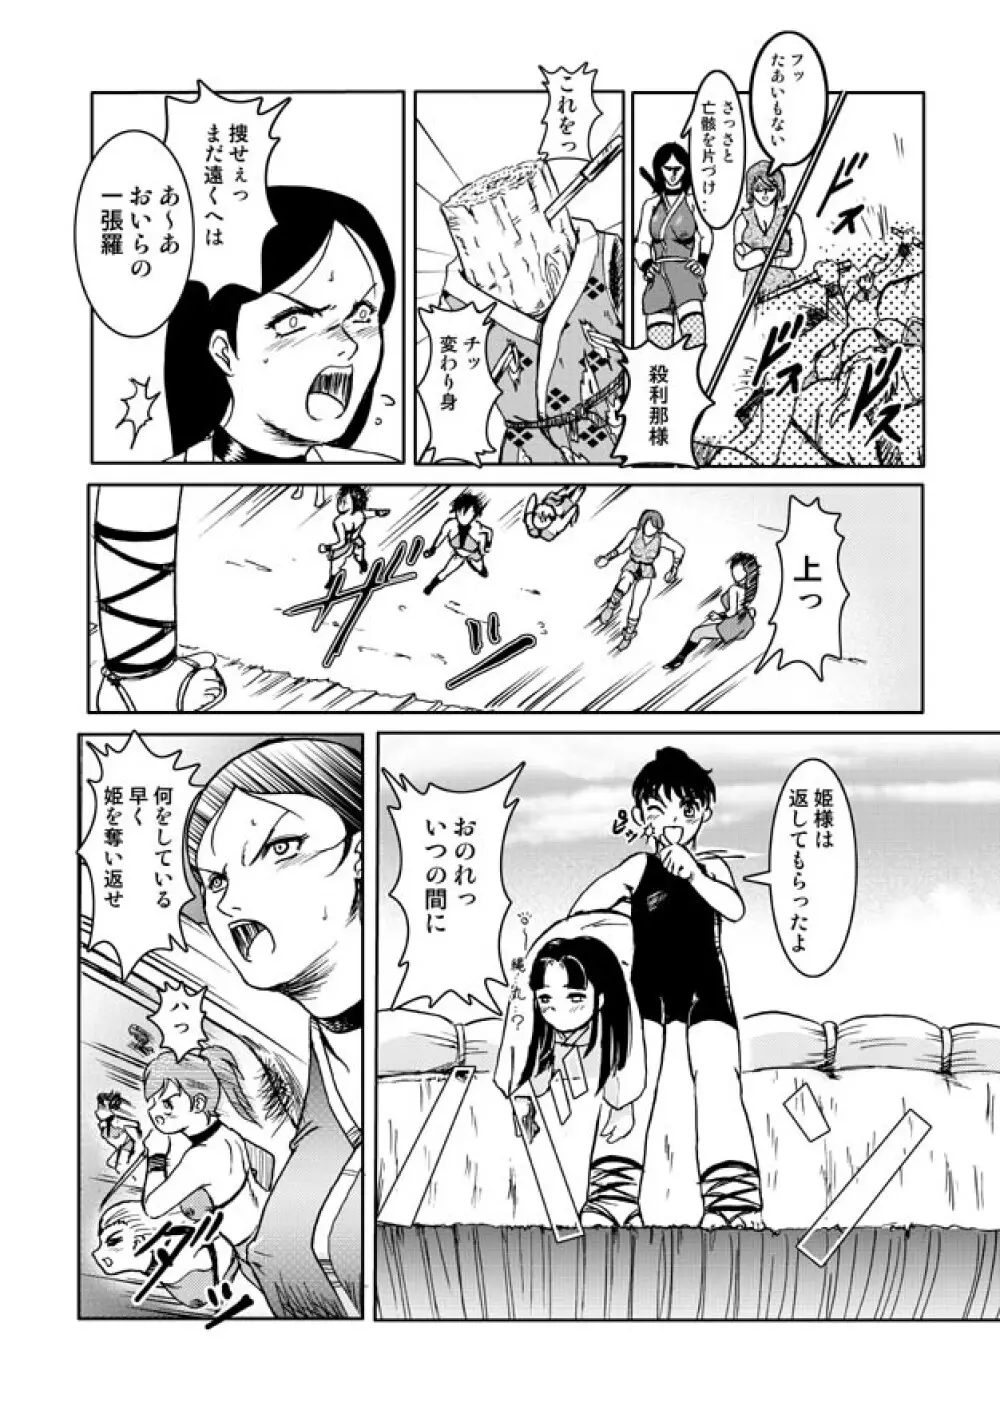 Same-themed manga about kid fighting female ninjas from japanese imageboard. Page.5